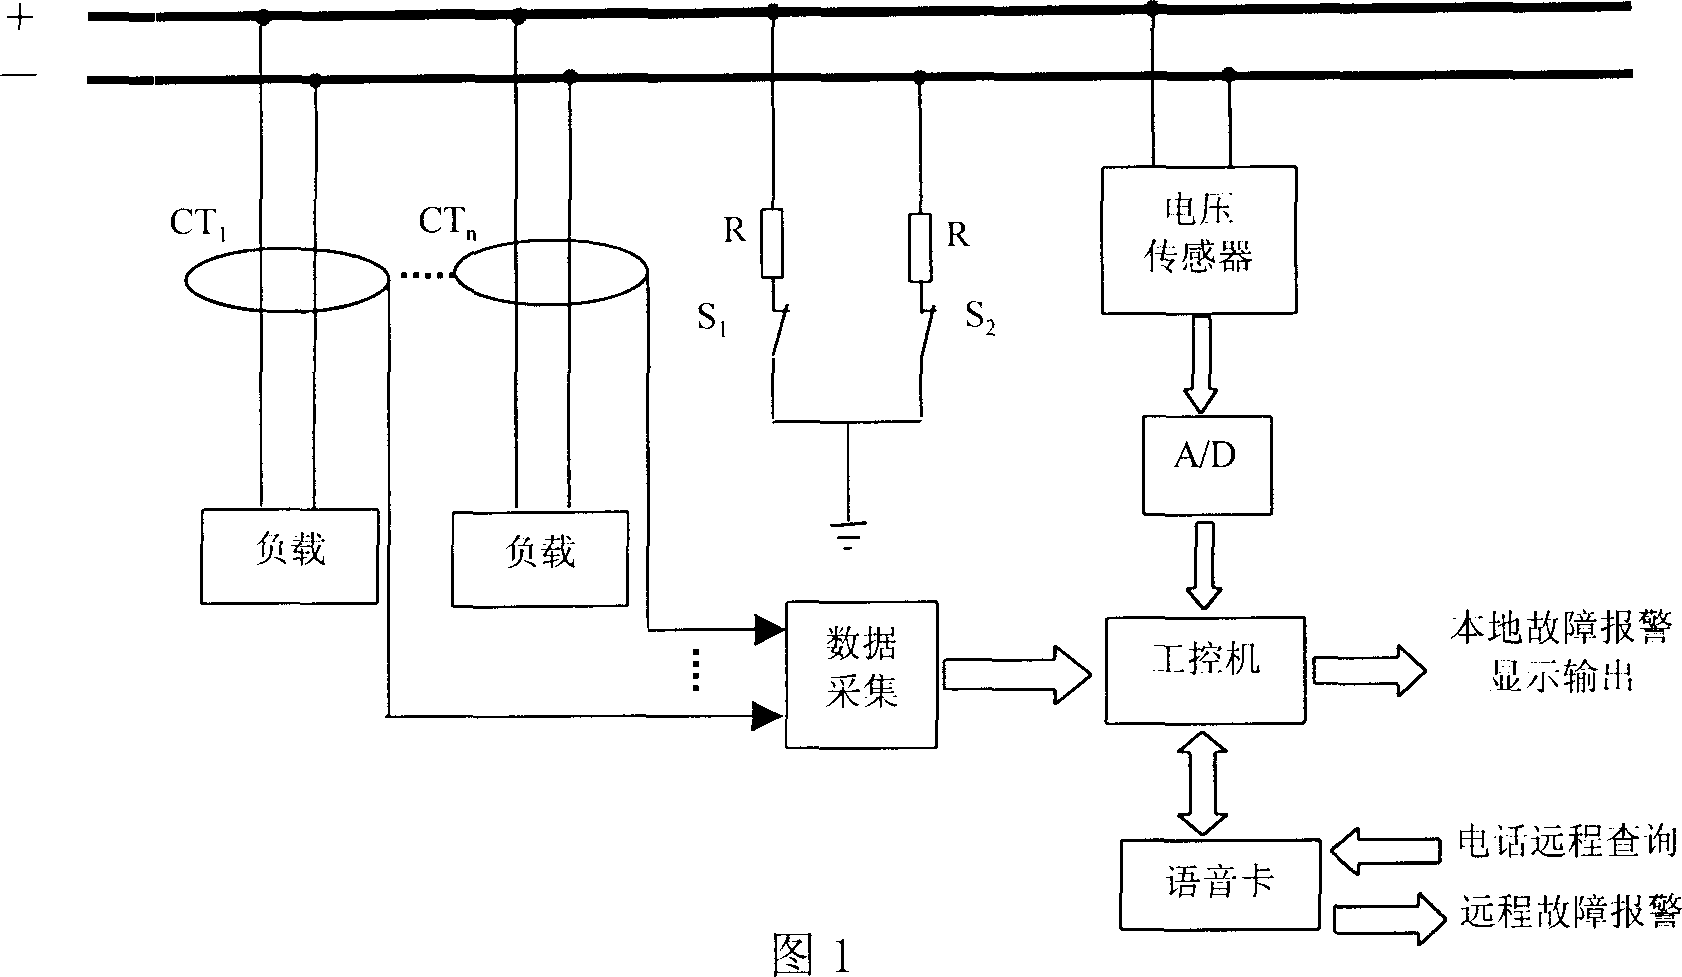 DC system insulating monitor apparatus with remote alarm and inquiry function